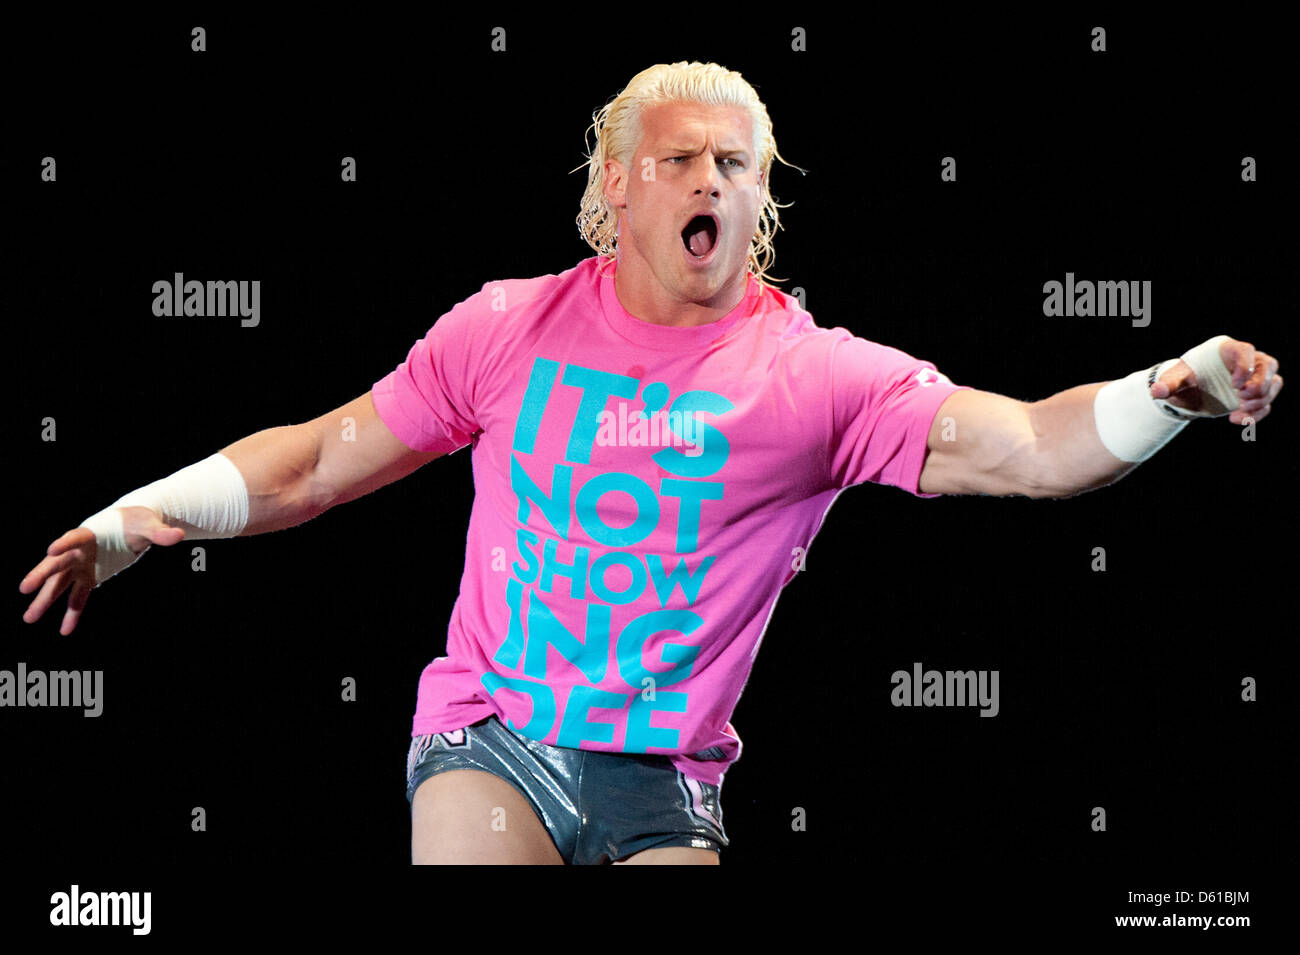 US-wrestler Dolph Ziggler shouts and gestures prior to a fight at the RAW WrestleMania Revenge Tour at the o2 World canue in Berlin, Germany, 14 April 2012. The WWE (World Wrestling Entertainment) celebrates its 20th German anniversary this April. The first show in Germany was staged in Kiel, Germany, in April 1992. Photo: Sebastian Kahnert Stock Photo